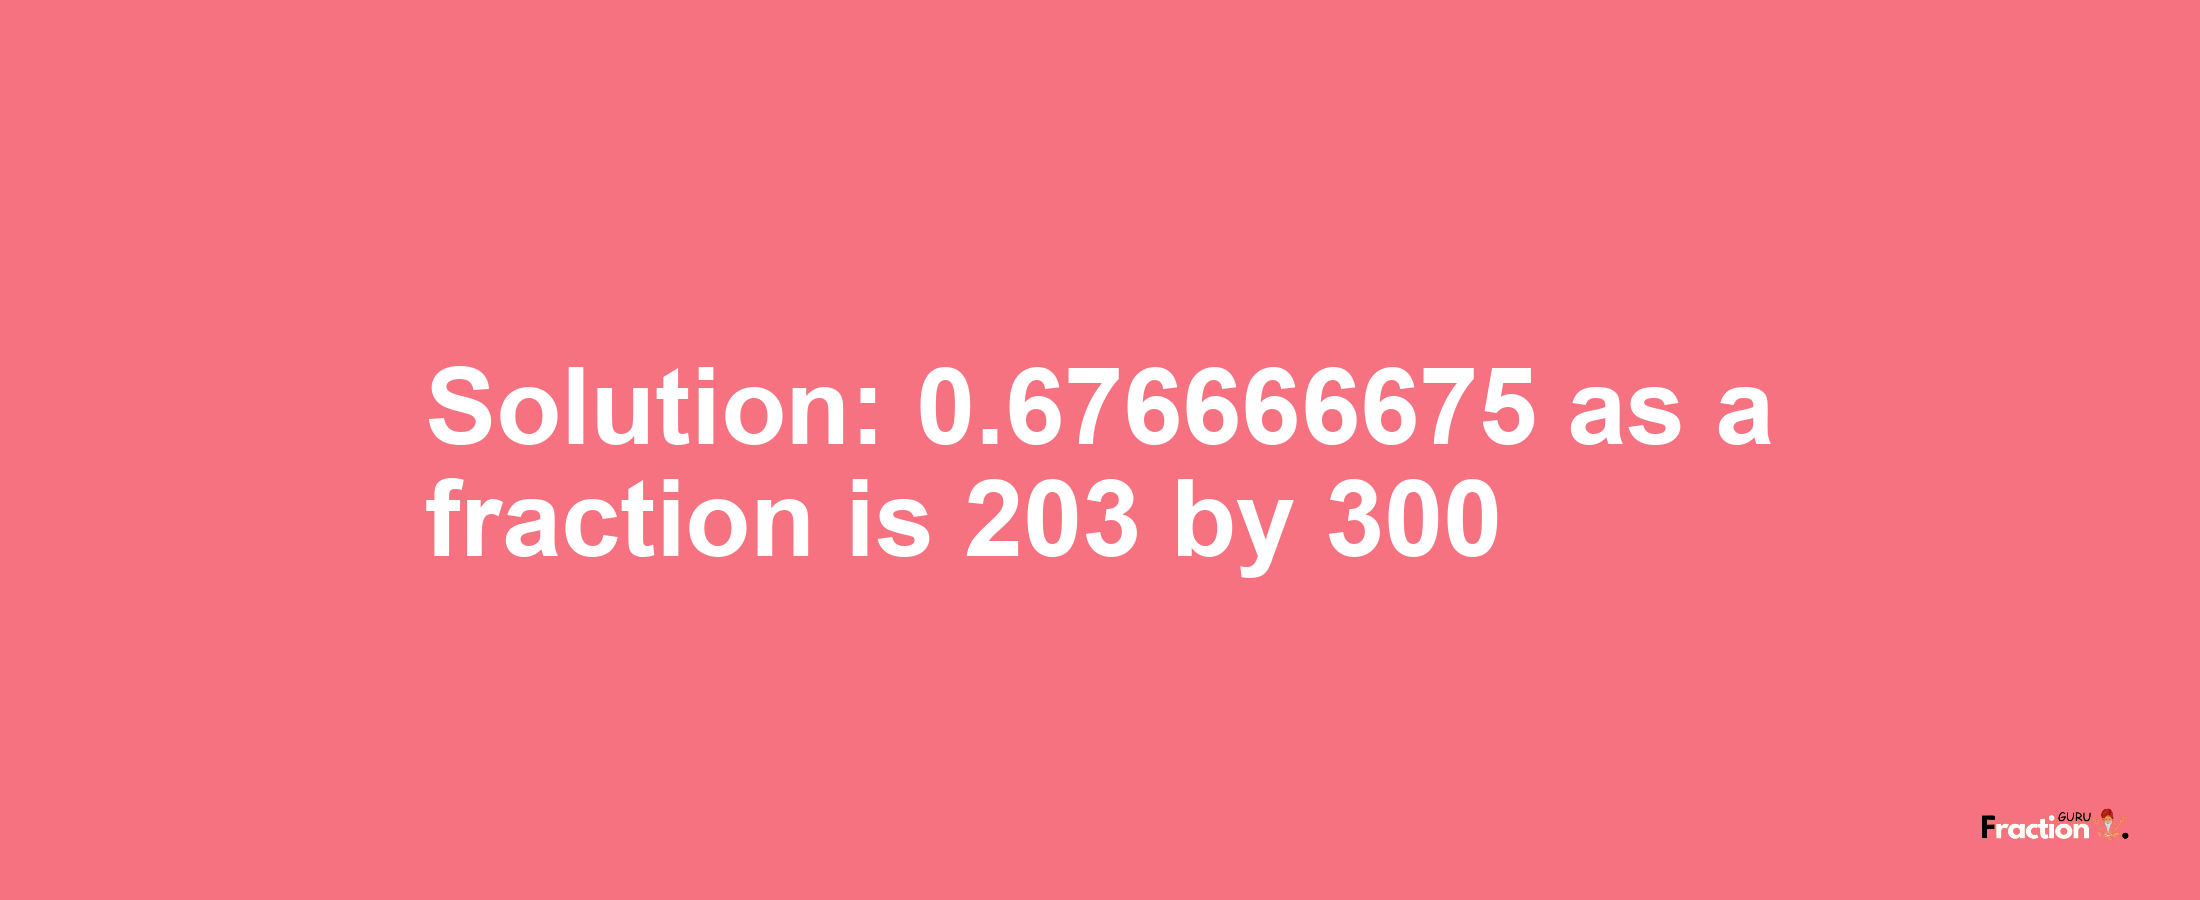 Solution:0.676666675 as a fraction is 203/300